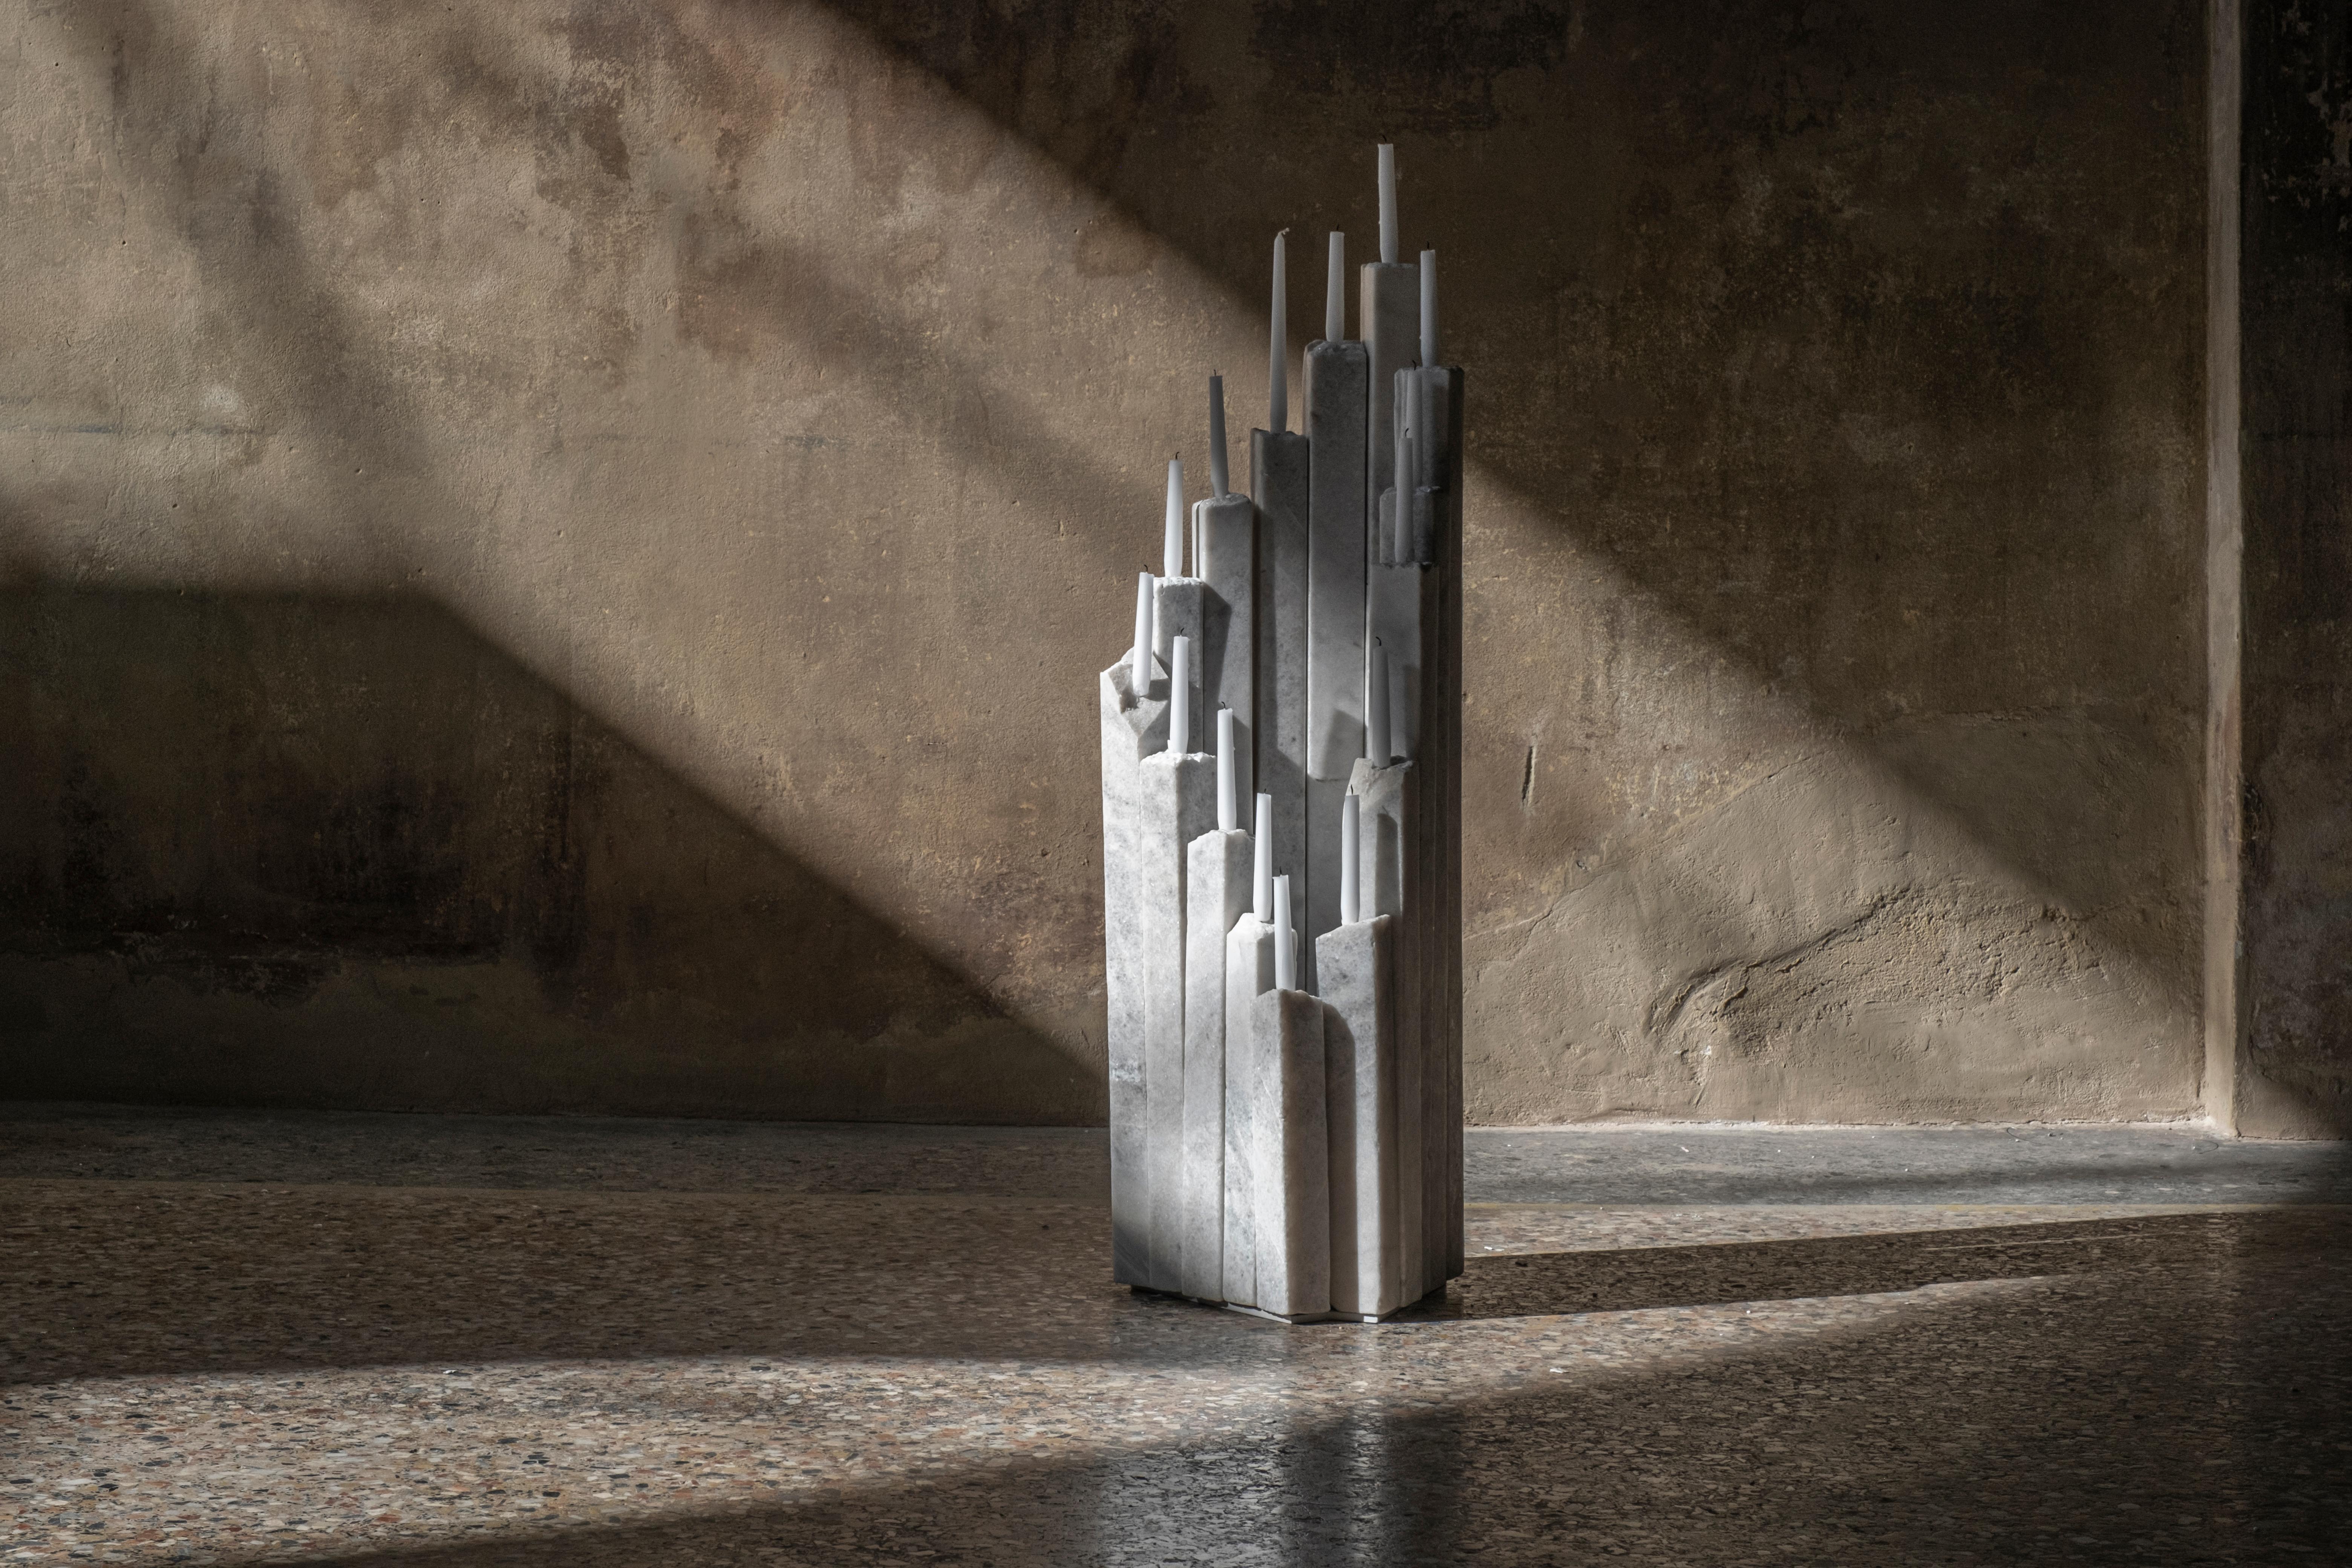 Ritus Candelabra by Andres Monnier.
One of a Kind.
Dimensions: D 30 x W 30 x H 120 cm.
Materials: White marble from San Luis Potosí, stainless steel.

Designer's biography
Treko concrete is a Mexican studio based in Ensenada, that has as a